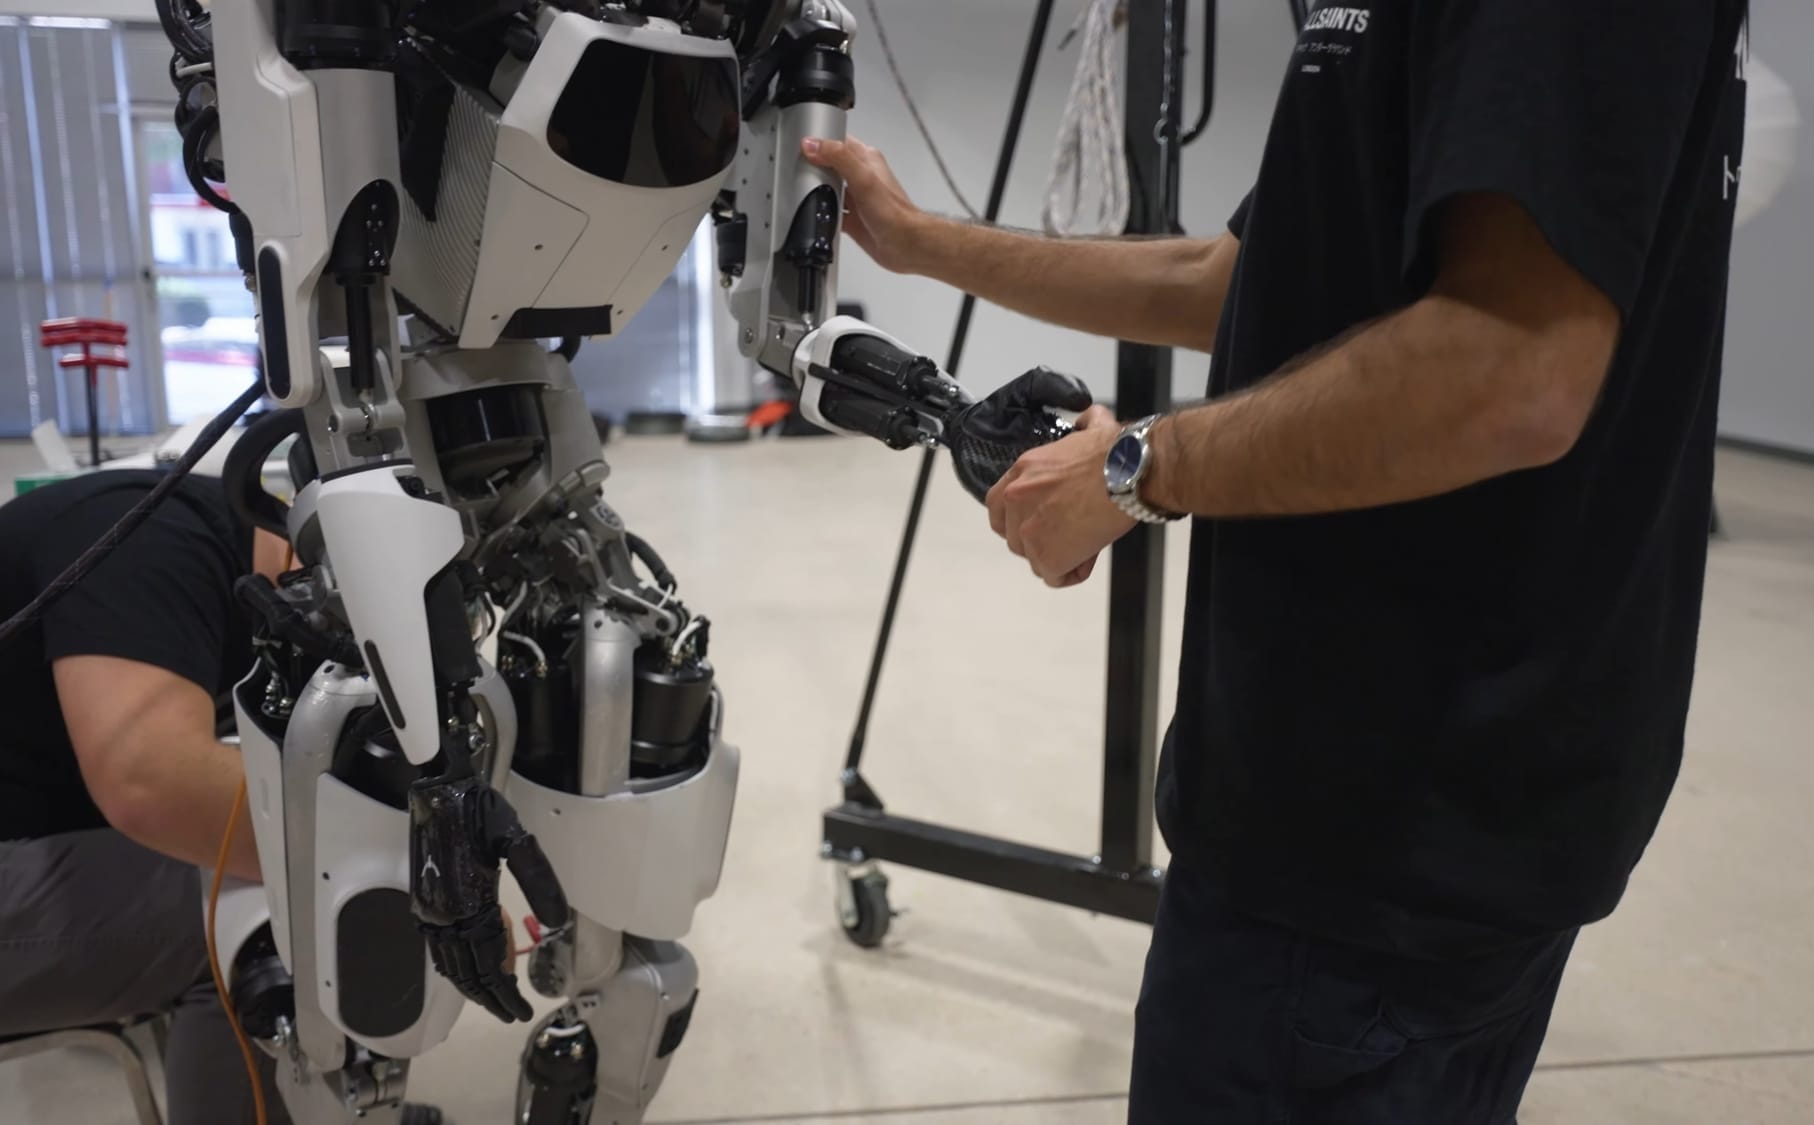 Meet Apollo, the real-life robot who wants to give you more free time